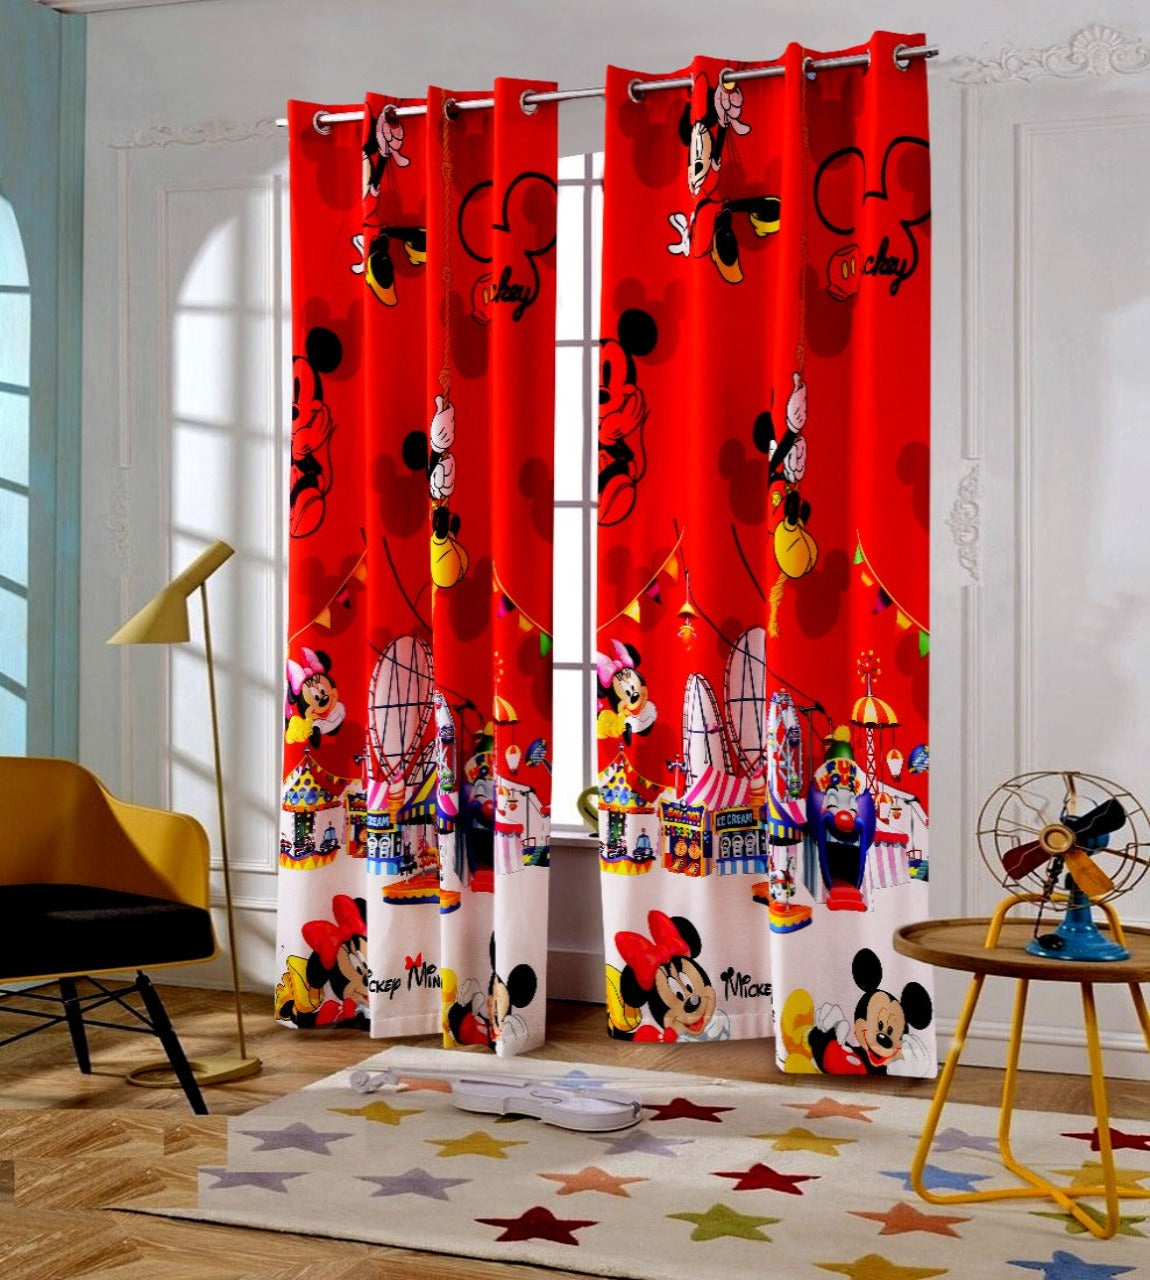 2 PCs Duck Curtains Panel With Lining-Mickey Minnie Apricot